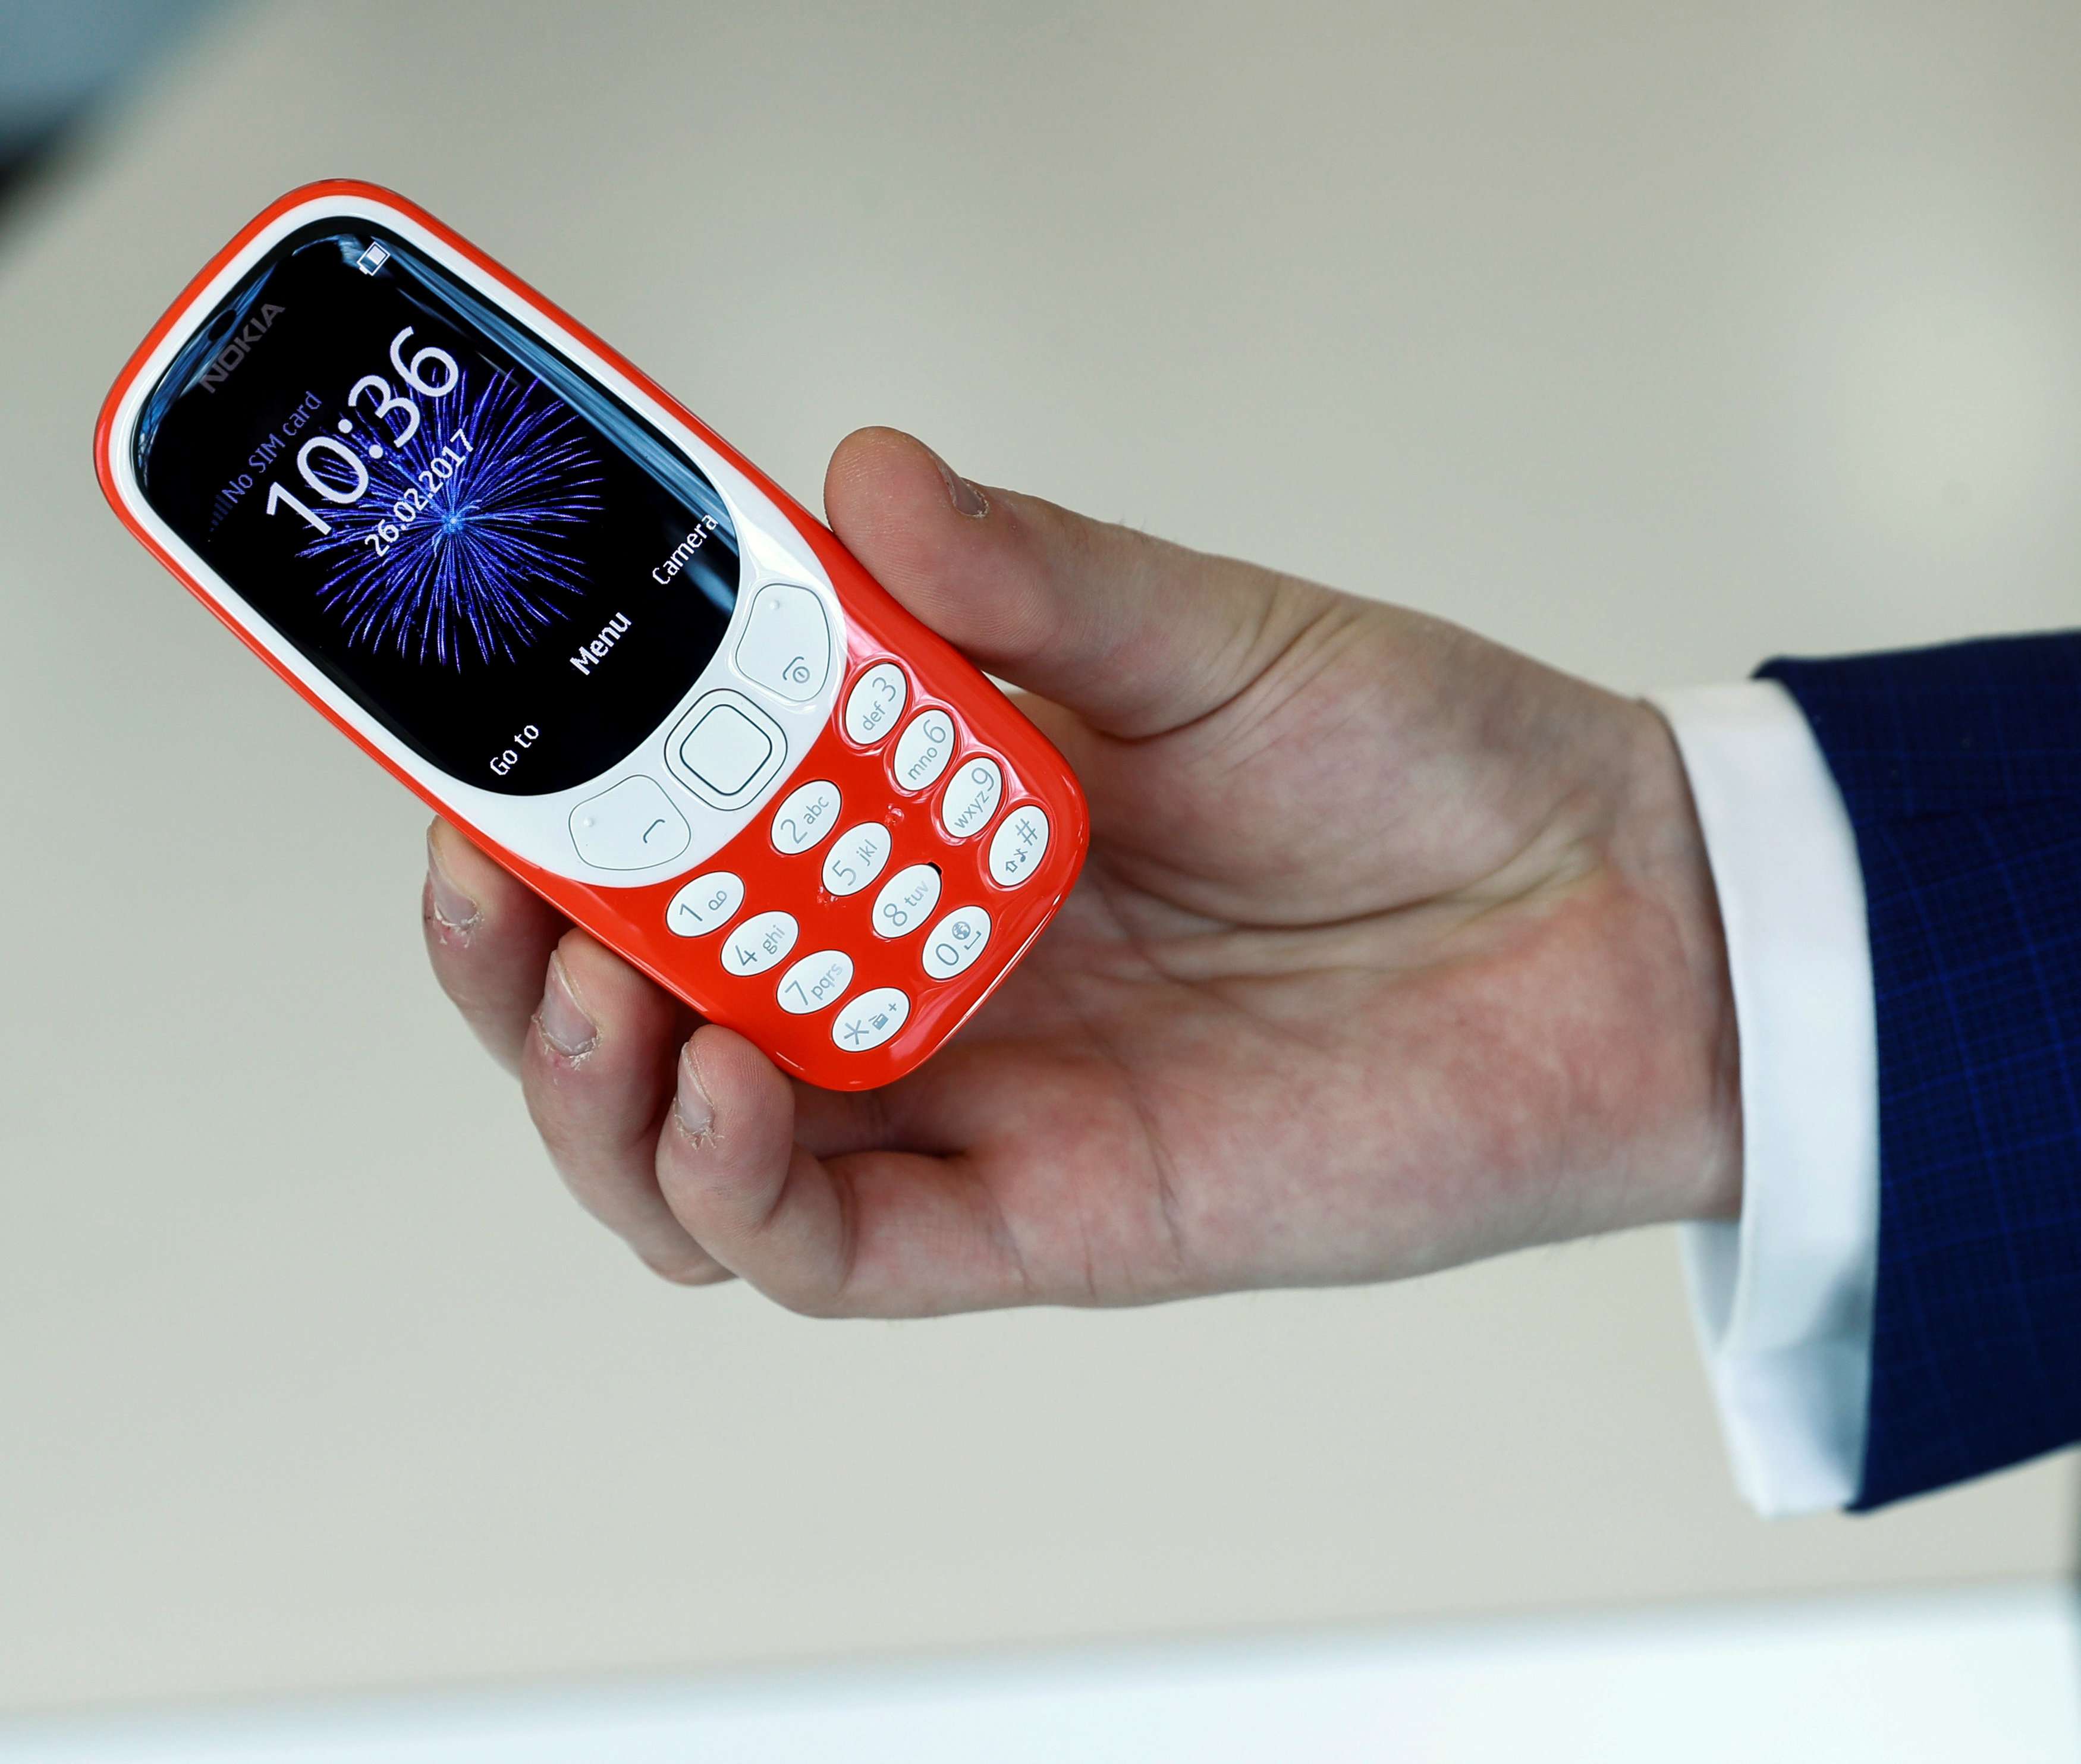 The new Nokia 3310 will feature impressive battery life and retro styling. Photo: Reuters